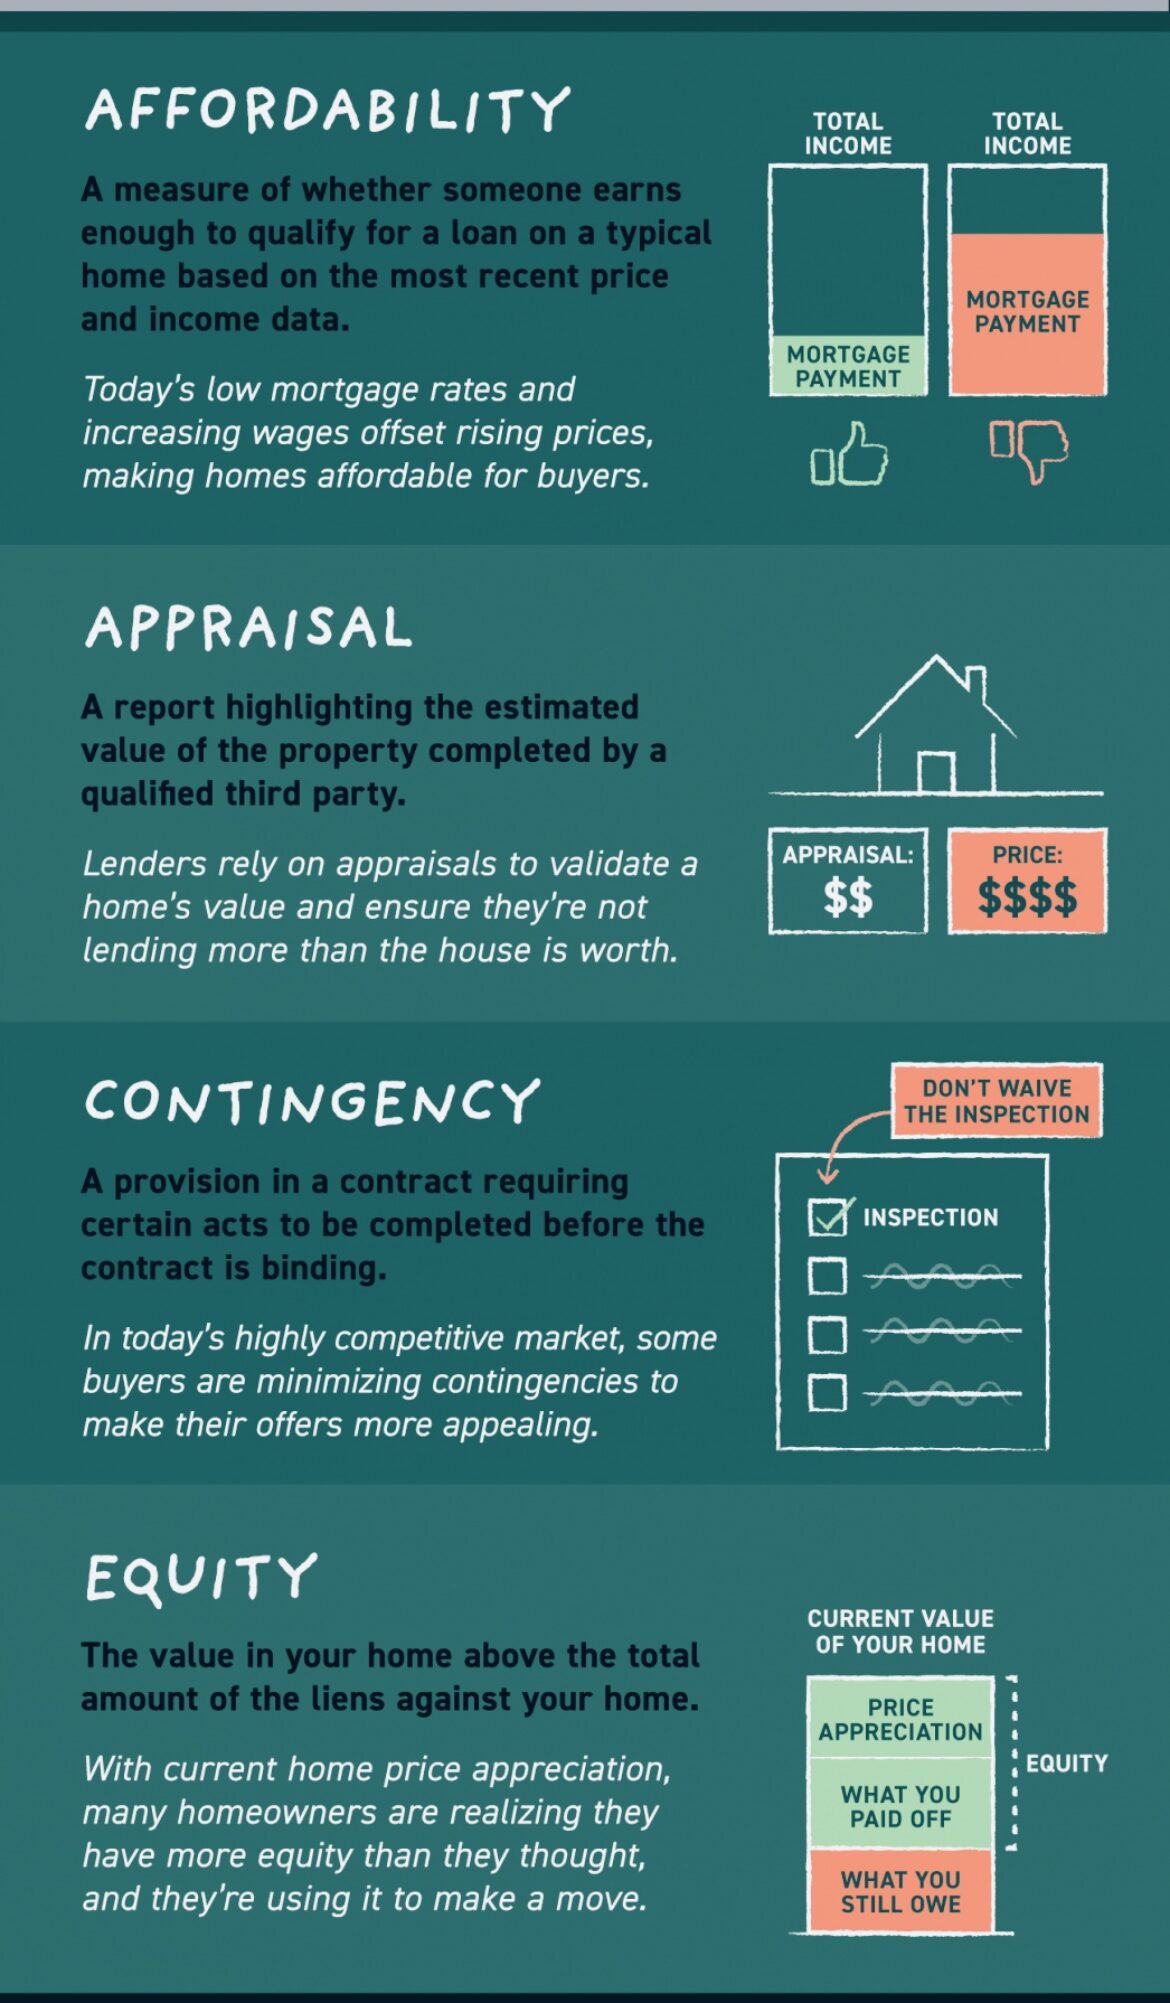 Key Terms in Today's Housing Market